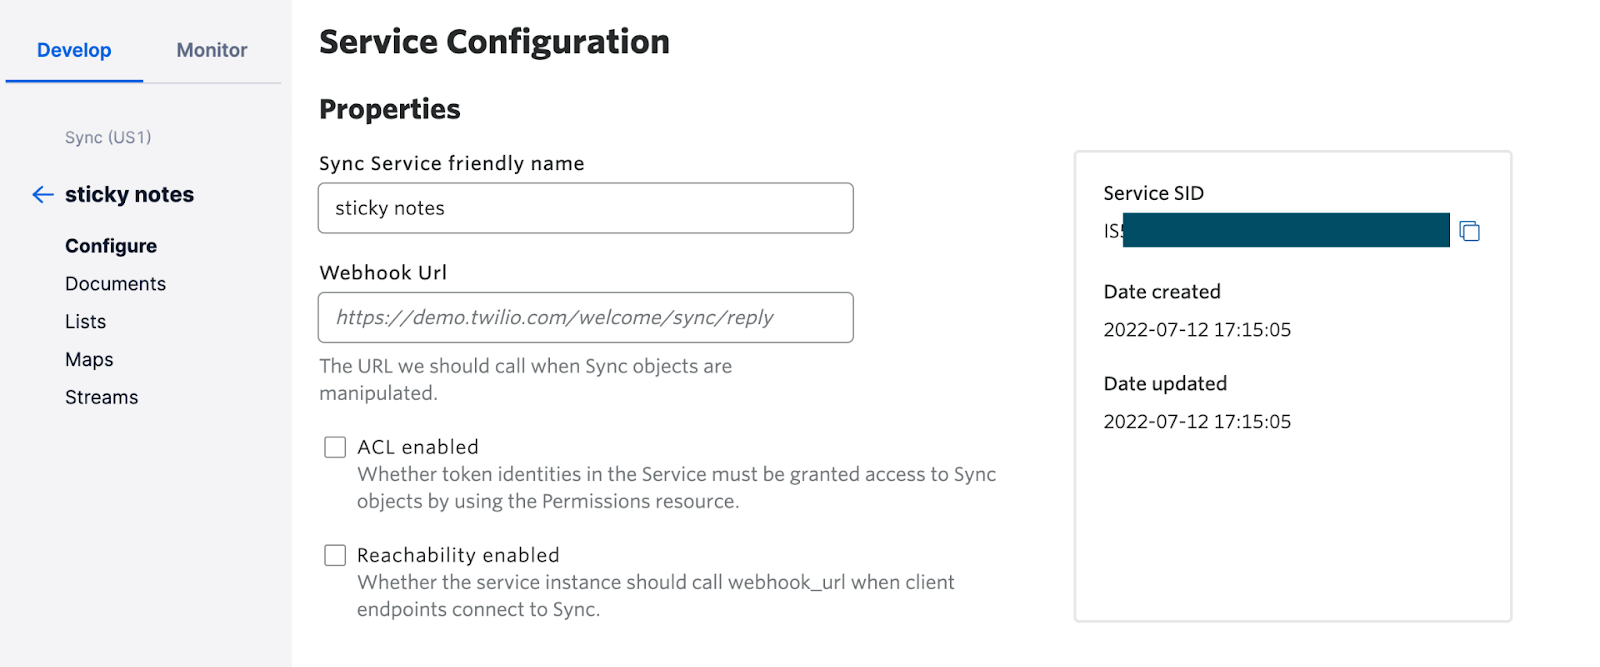 Sync service configuration page, with information about the new service